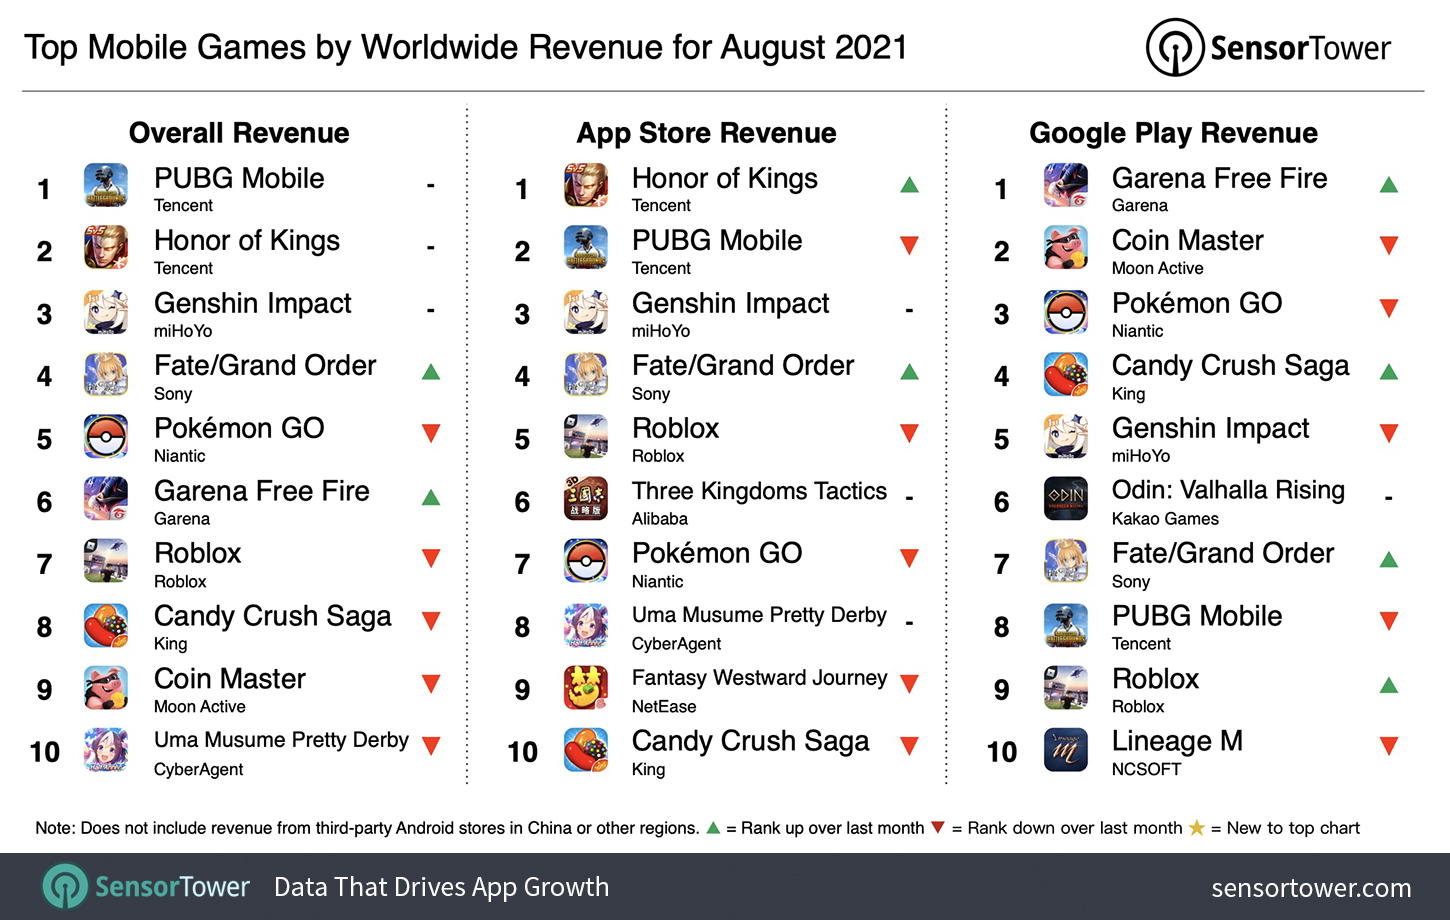 Top Grossing Mobile Games Worldwide for August 2021